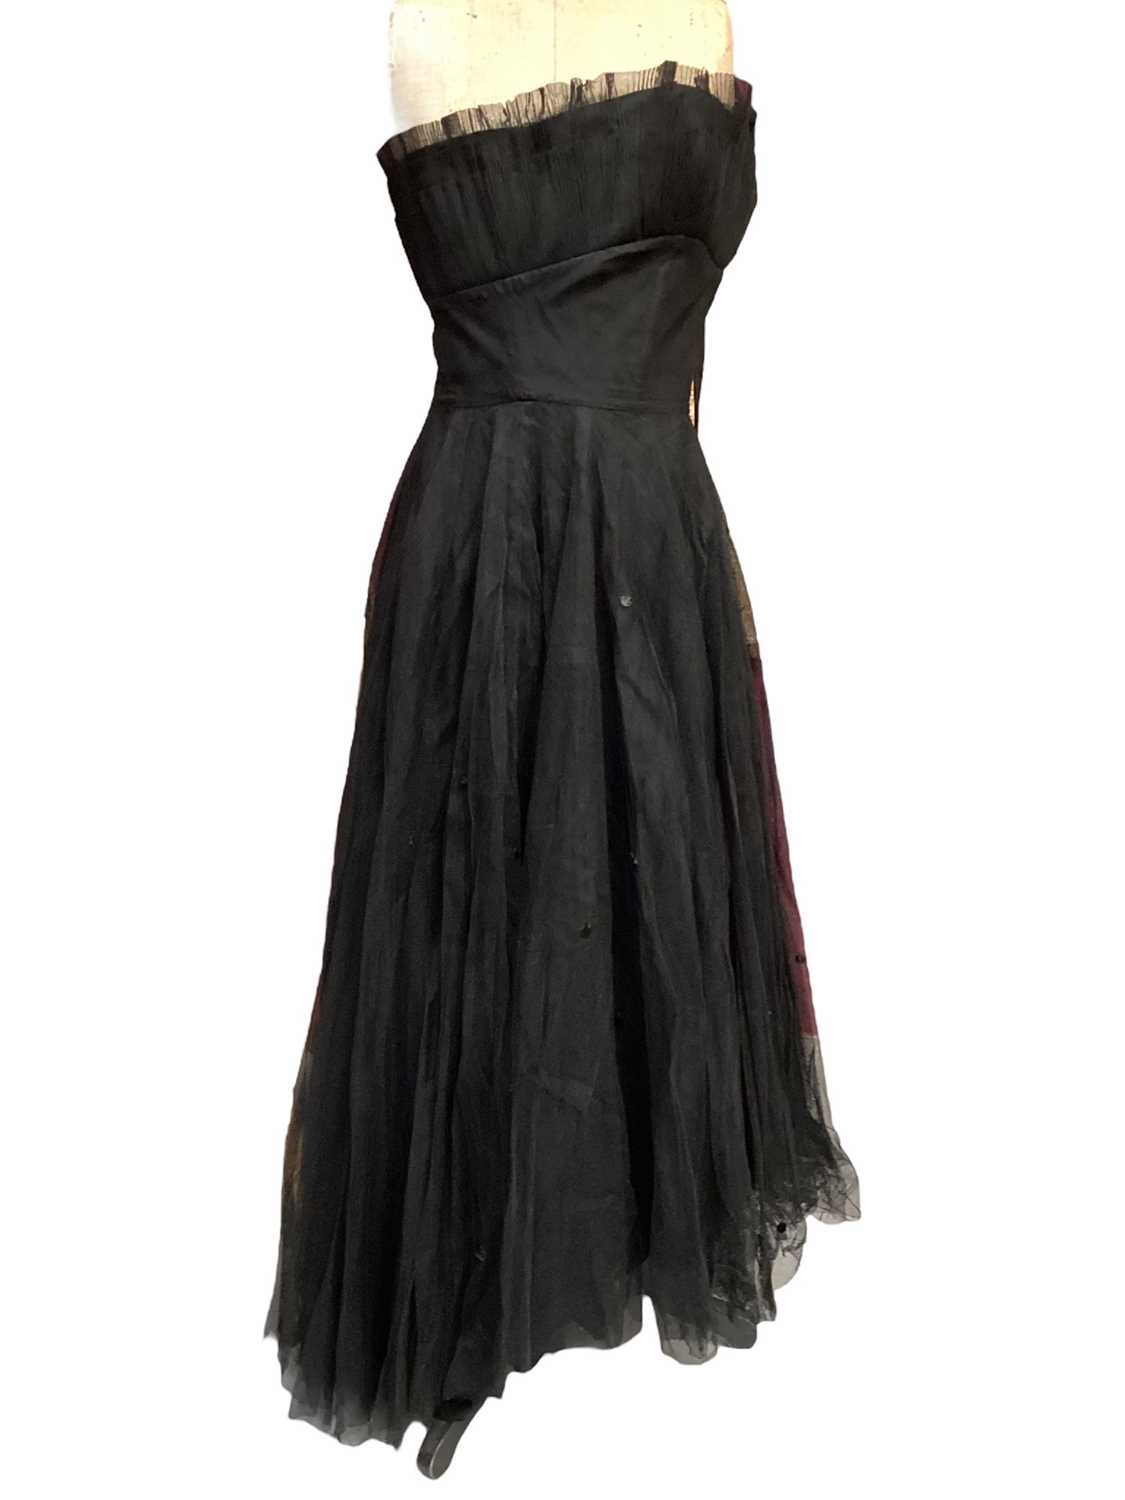 1950s black cocktail dress (label cut), Frank Usher black evening dress with looped underskirt plus - Image 2 of 3